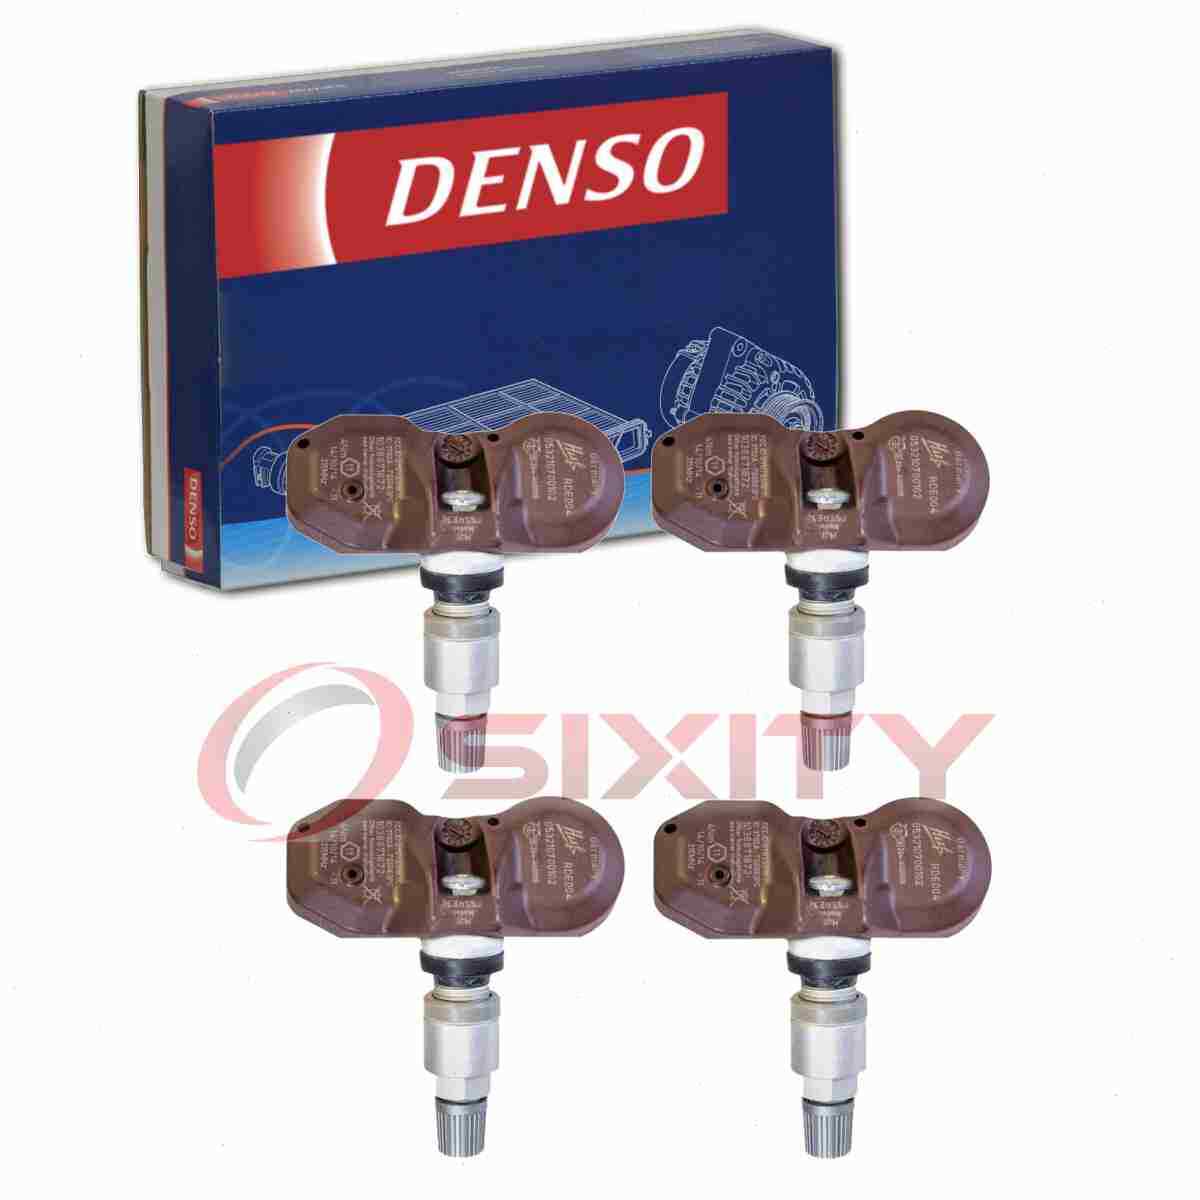 4 pc Denso Tire Pressure Monitoring System Sensors for 1997-2001 BMW 740iL an